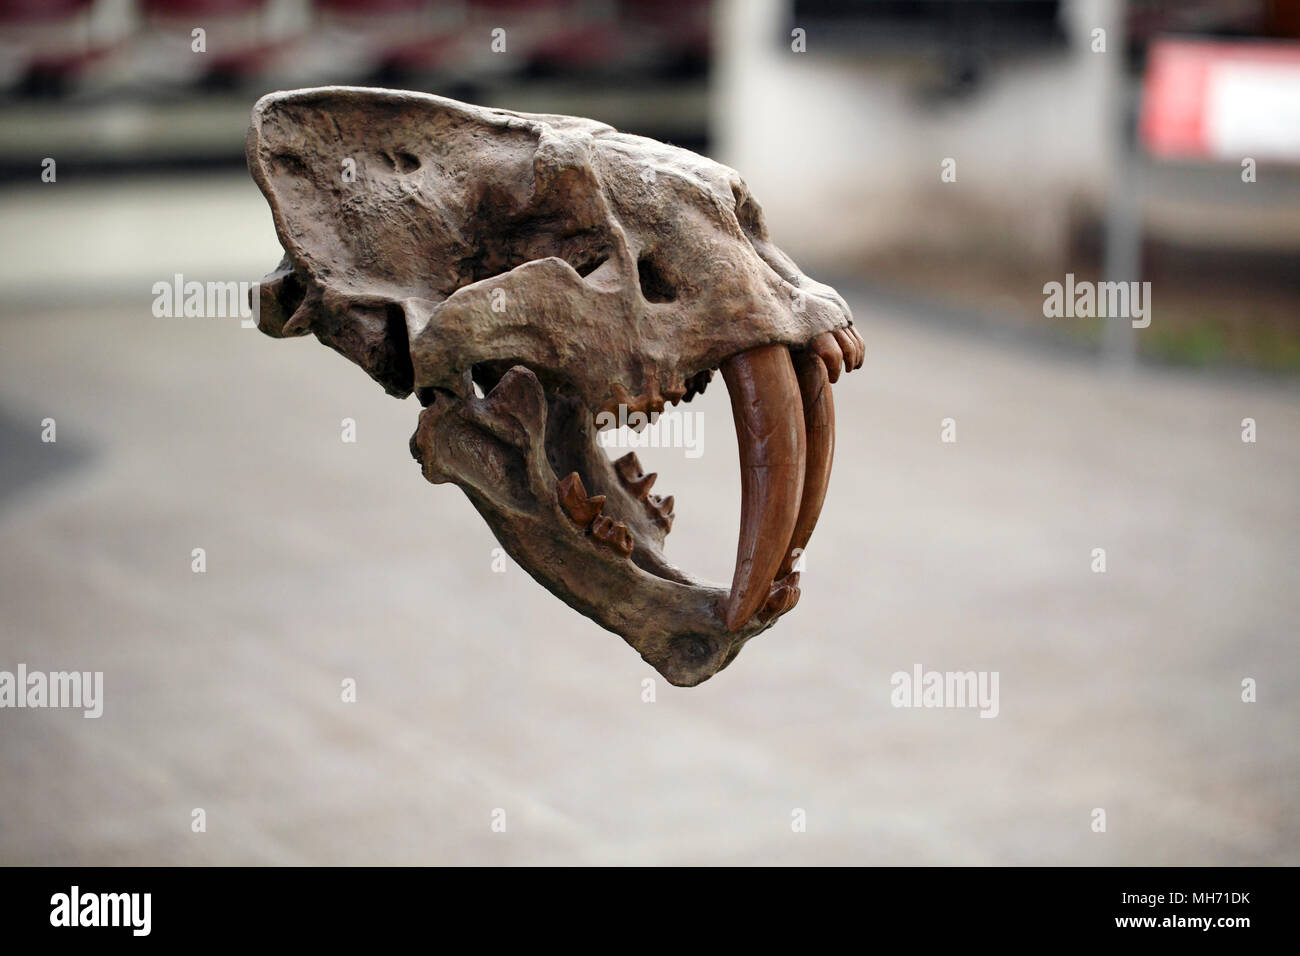 Sabre-toothed tiger fossil skull and jaw. Stock Photo